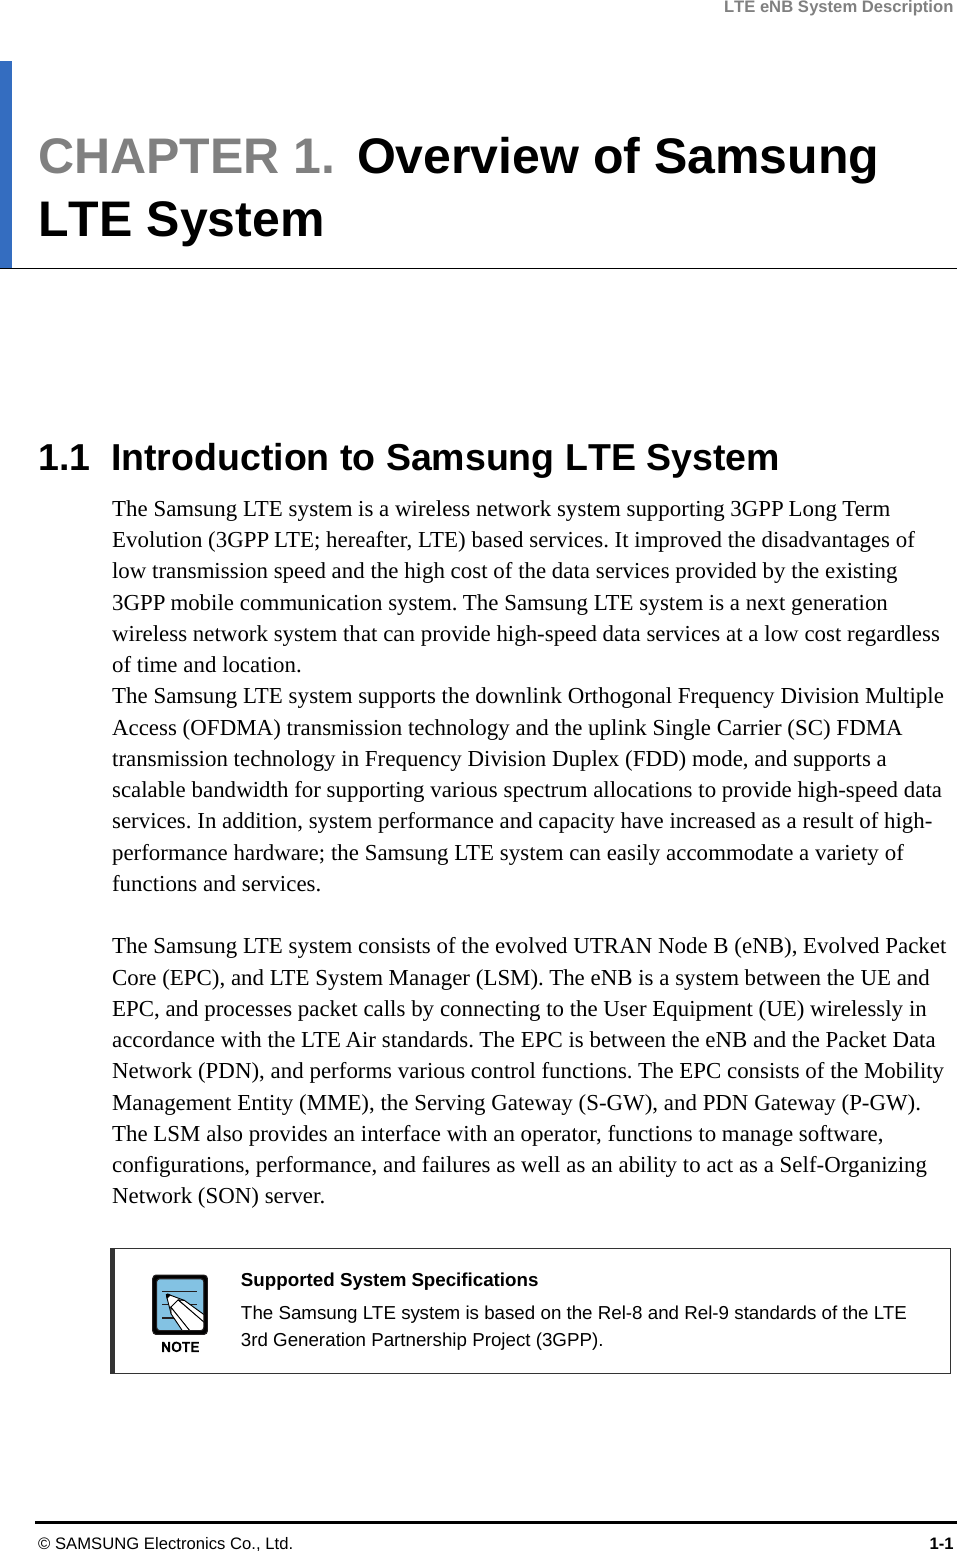 LTE eNB System Description CHAPTER 1.  Overview of Samsung LTE System      1.1  Introduction to Samsung LTE System The Samsung LTE system is a wireless network system supporting 3GPP Long Term Evolution (3GPP LTE; hereafter, LTE) based services. It improved the disadvantages of low transmission speed and the high cost of the data services provided by the existing 3GPP mobile communication system. The Samsung LTE system is a next generation wireless network system that can provide high-speed data services at a low cost regardless of time and location. The Samsung LTE system supports the downlink Orthogonal Frequency Division Multiple Access (OFDMA) transmission technology and the uplink Single Carrier (SC) FDMA transmission technology in Frequency Division Duplex (FDD) mode, and supports a scalable bandwidth for supporting various spectrum allocations to provide high-speed data services. In addition, system performance and capacity have increased as a result of high-performance hardware; the Samsung LTE system can easily accommodate a variety of functions and services.  The Samsung LTE system consists of the evolved UTRAN Node B (eNB), Evolved Packet Core (EPC), and LTE System Manager (LSM). The eNB is a system between the UE and EPC, and processes packet calls by connecting to the User Equipment (UE) wirelessly in accordance with the LTE Air standards. The EPC is between the eNB and the Packet Data Network (PDN), and performs various control functions. The EPC consists of the Mobility Management Entity (MME), the Serving Gateway (S-GW), and PDN Gateway (P-GW). The LSM also provides an interface with an operator, functions to manage software, configurations, performance, and failures as well as an ability to act as a Self-Organizing Network (SON) server.   Supported System Specifications   The Samsung LTE system is based on the Rel-8 and Rel-9 standards of the LTE 3rd Generation Partnership Project (3GPP).  © SAMSUNG Electronics Co., Ltd.  1-1 